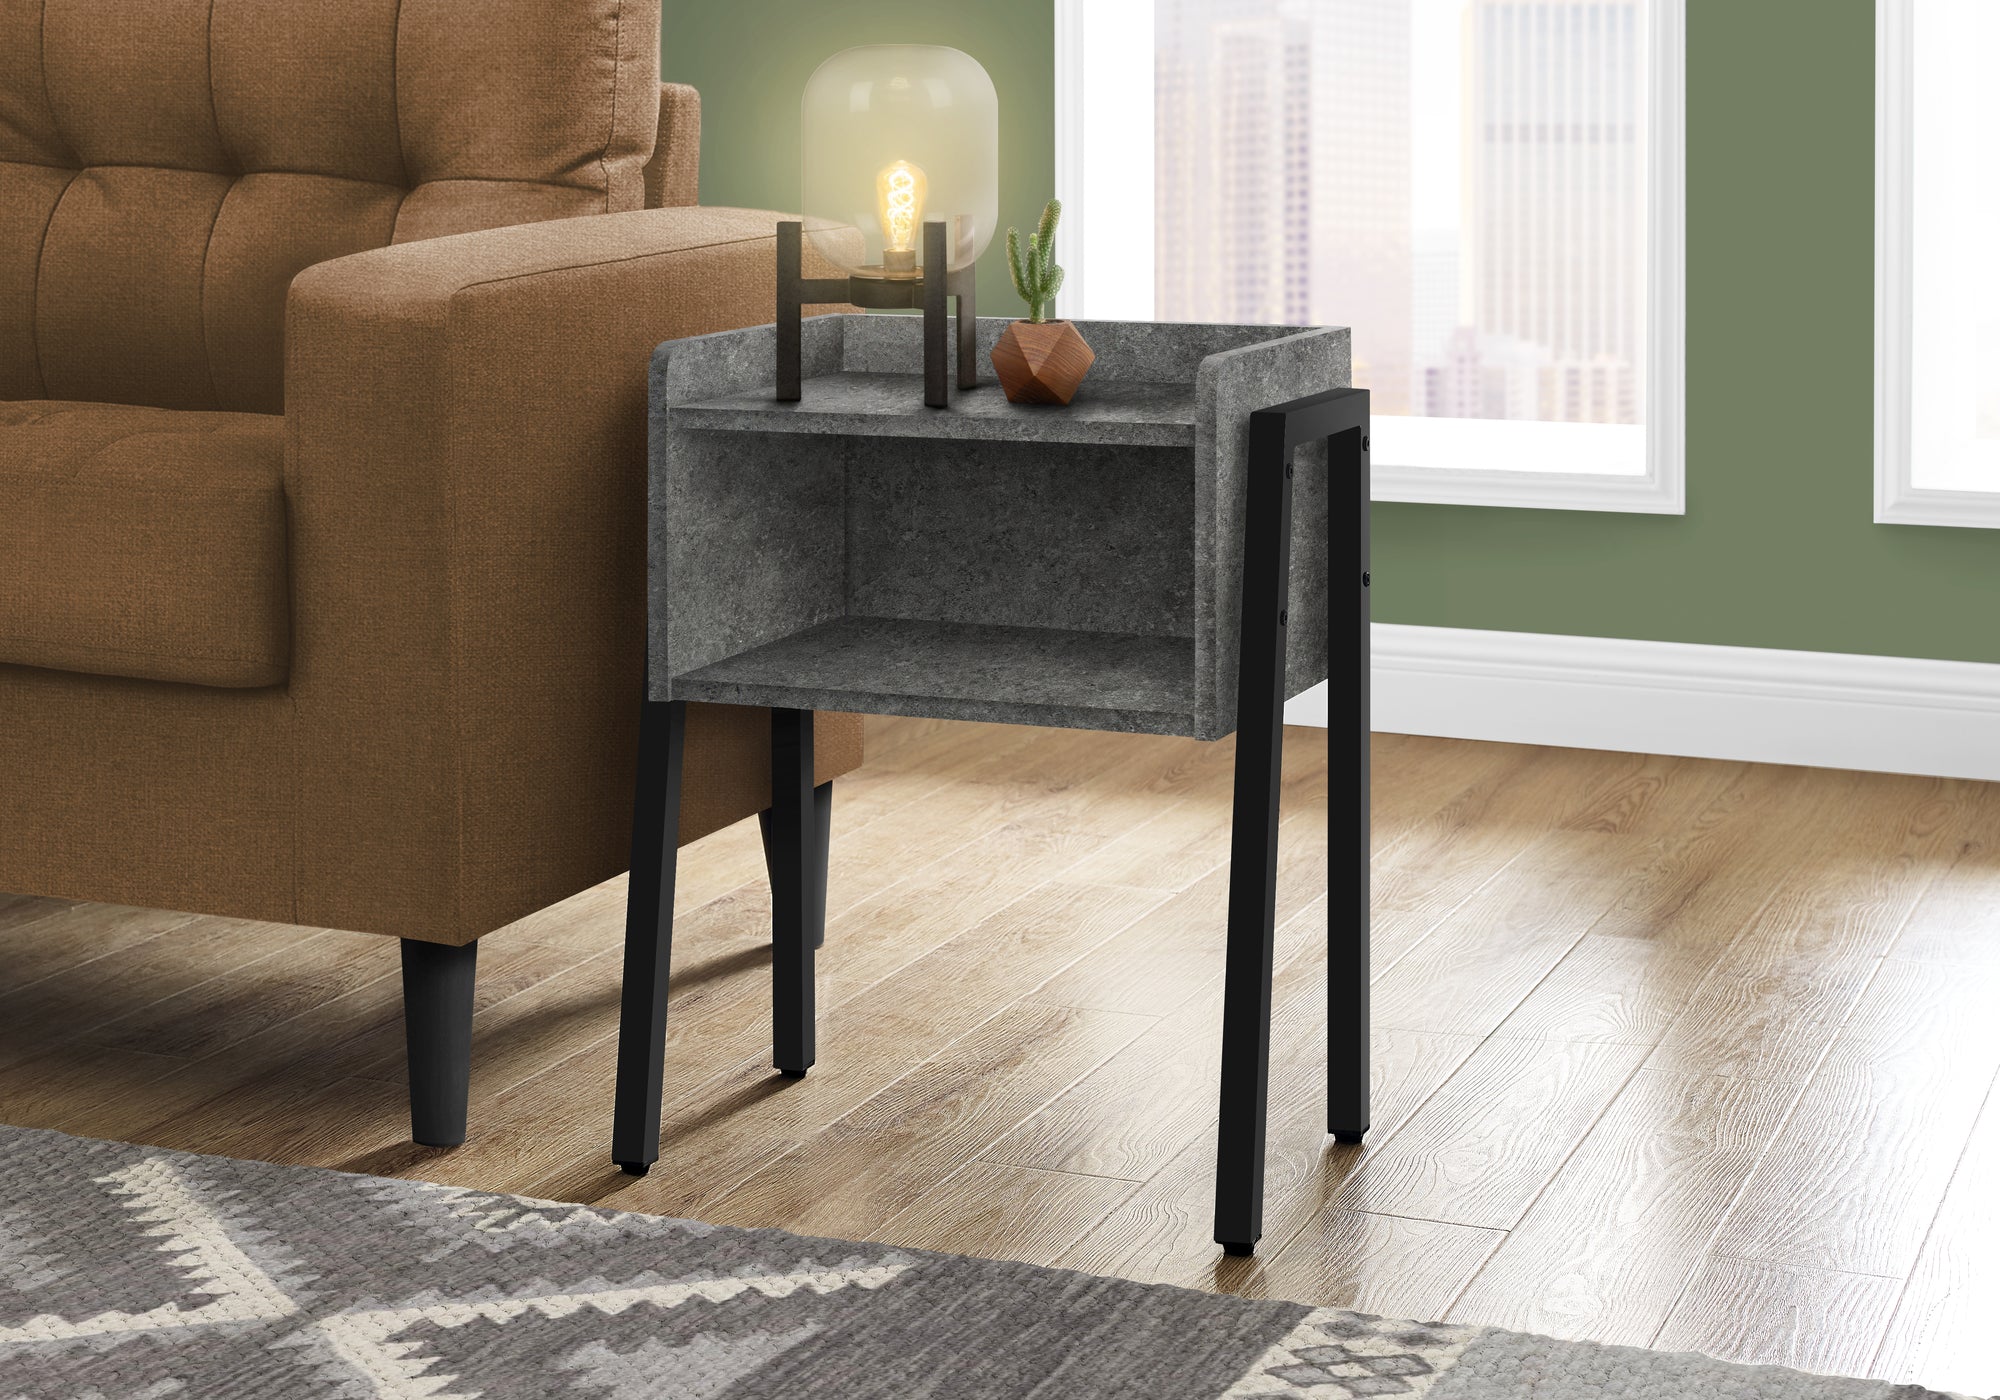 I 3584 - ACCENT TABLE - 23"H / GREY STONE-LOOK / BLACK METAL BY MONARCH SPECIALTIES INC